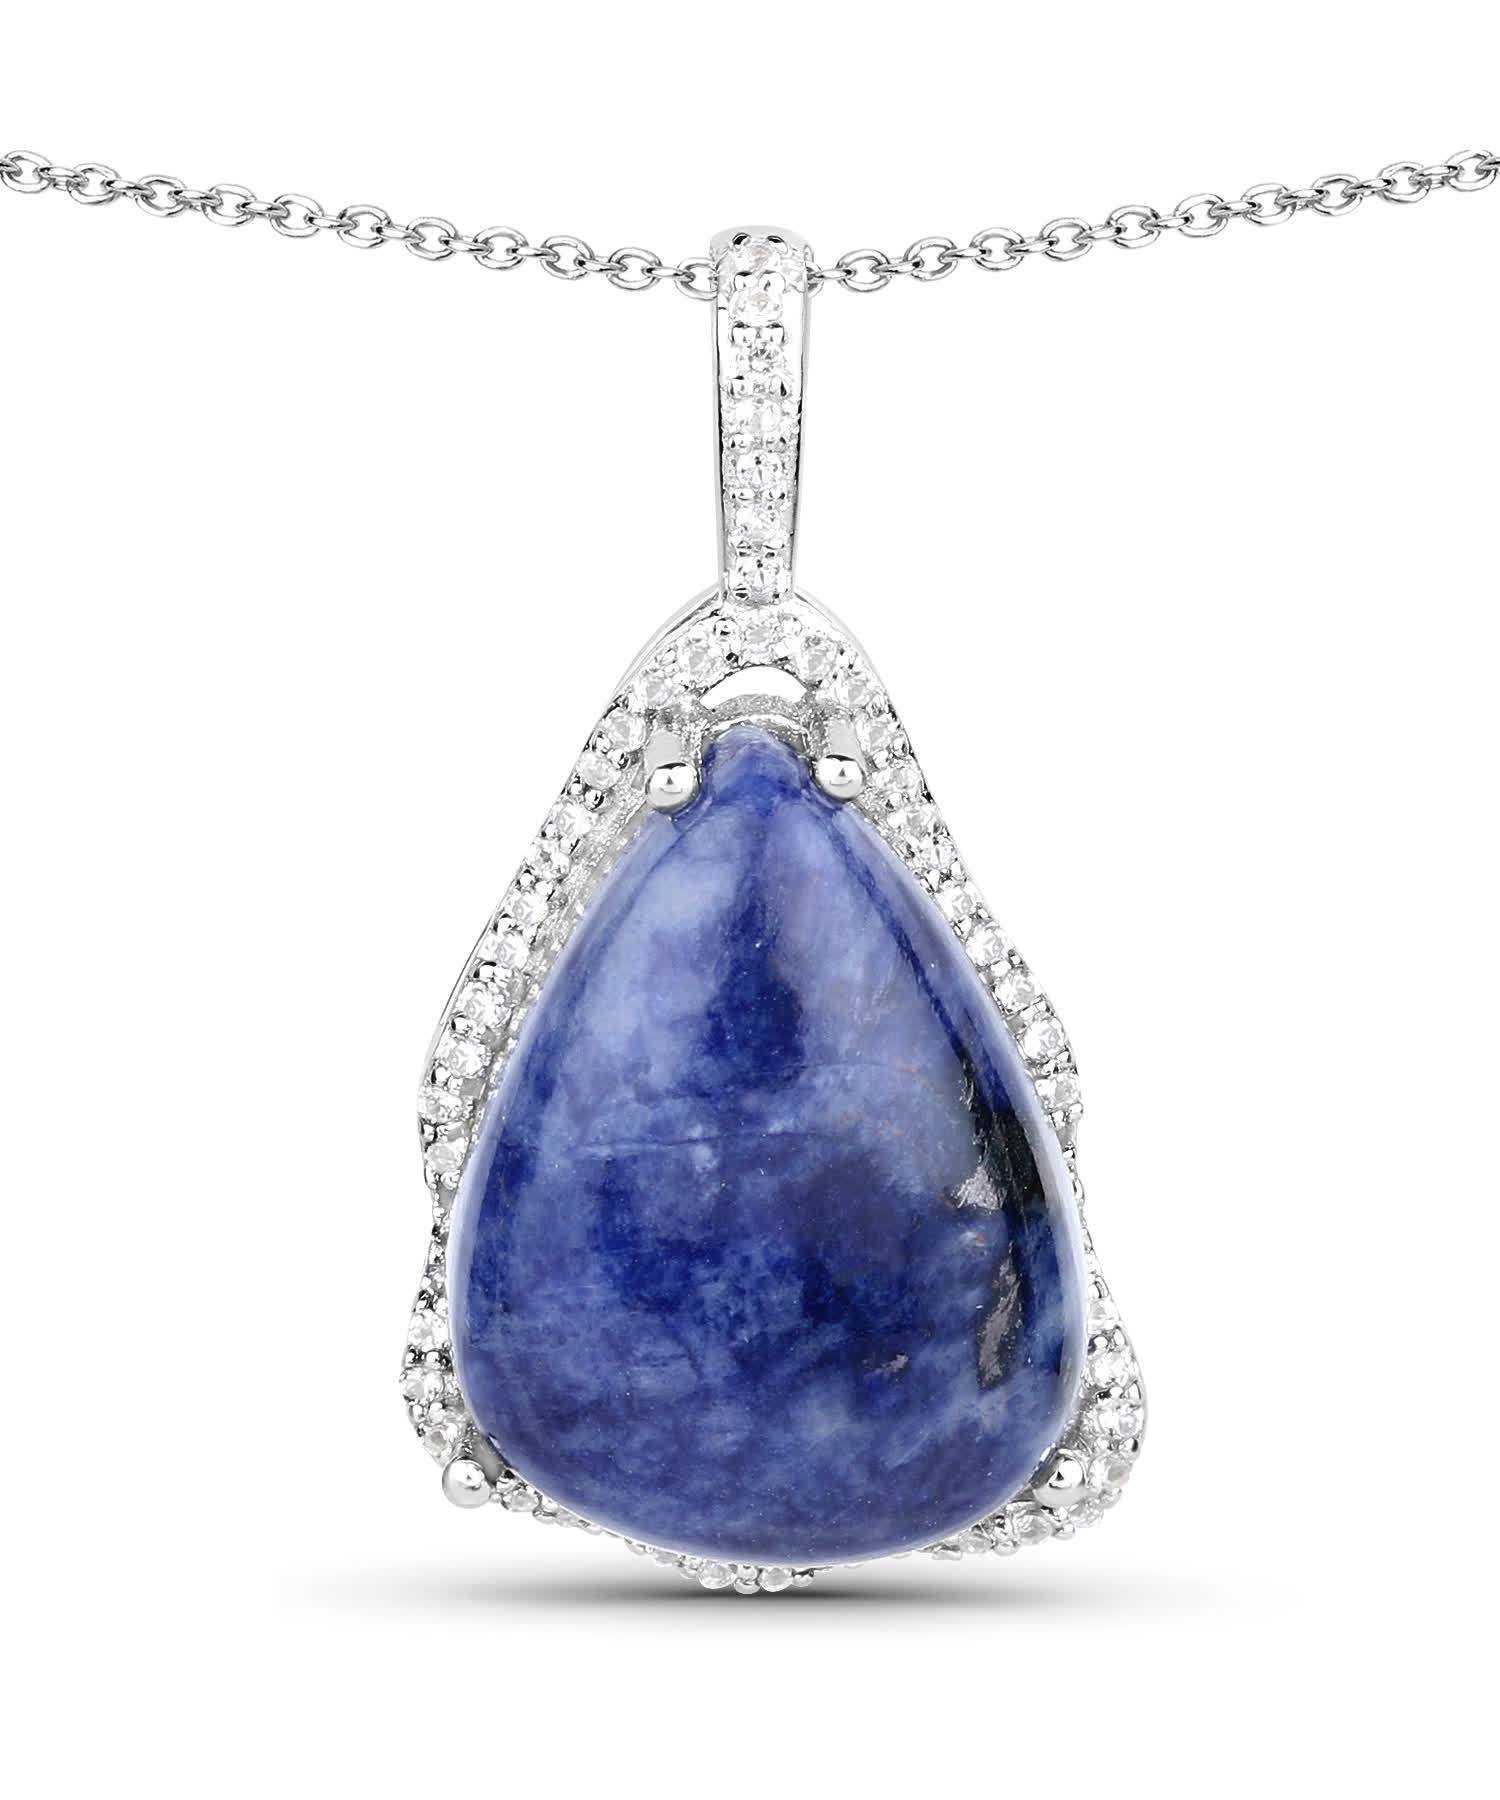 5.81ctw Natural Aventurine and Topaz Rhodium Plated 925 Sterling Silver Pendant With Chain View 1